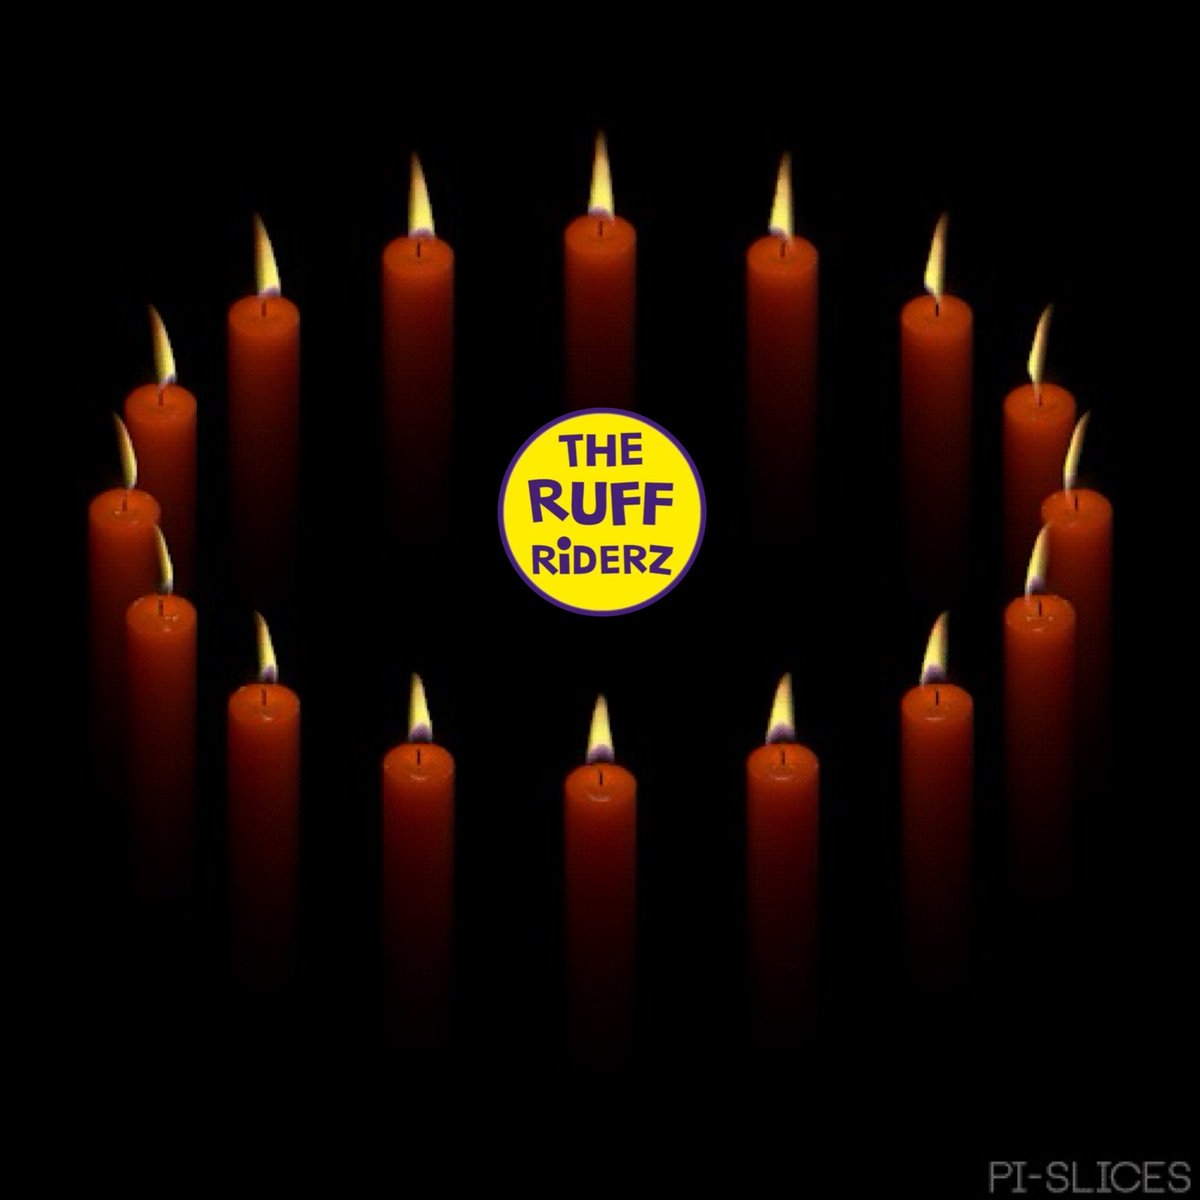 🌈🏍️💔We will burn our #theruffriderz groupcandle today for a very dear friend of our Riderz @MelissaLey3 family Greyson, who crossed 🌈Bridge. Run Free sweet Greyson. May this candle enlighten your path and bring comfort to your friends. Until we meet again 🌈✨